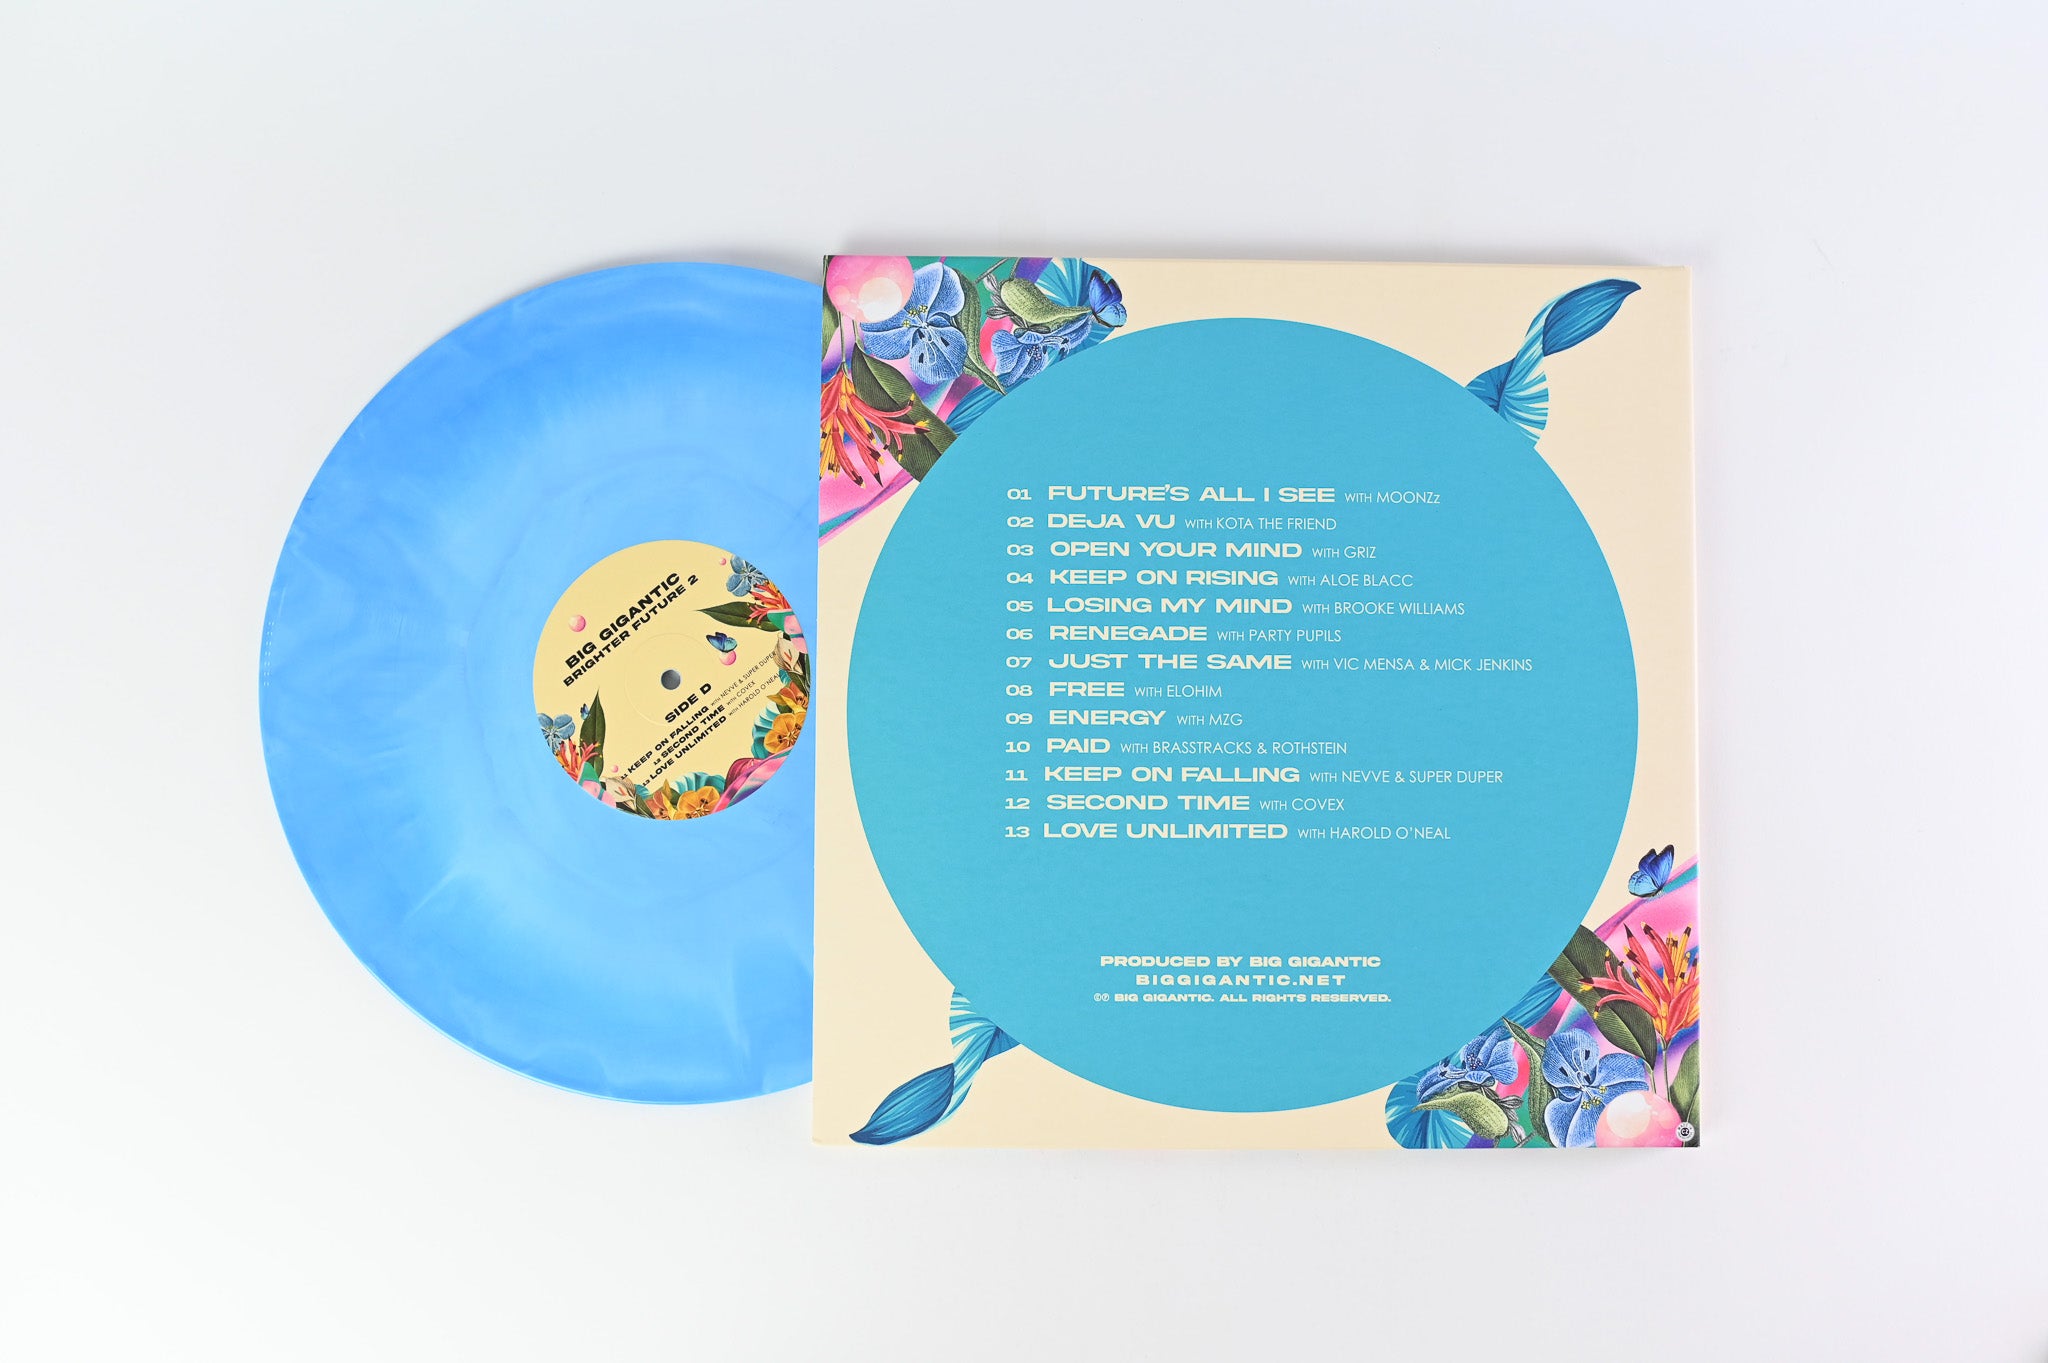 Big Gigantic - Brighter Future 2 Self-Released Limited Edition on Blue Galaxy Vinyl